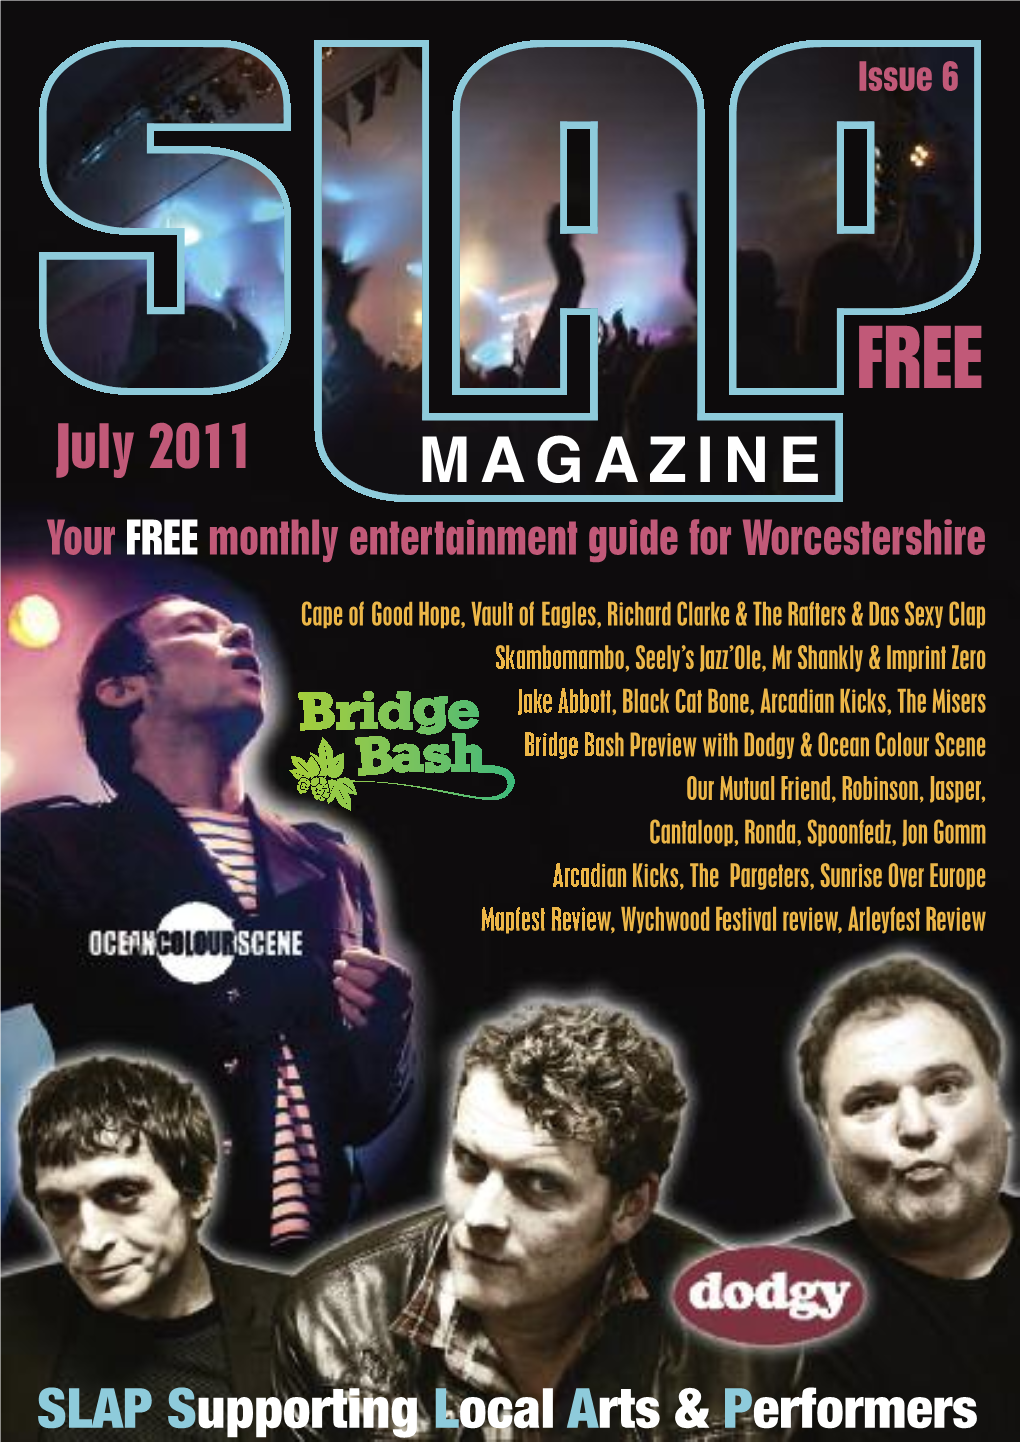 July 2011 Your FREE Monthly Entertainment Guide for Worcestershire